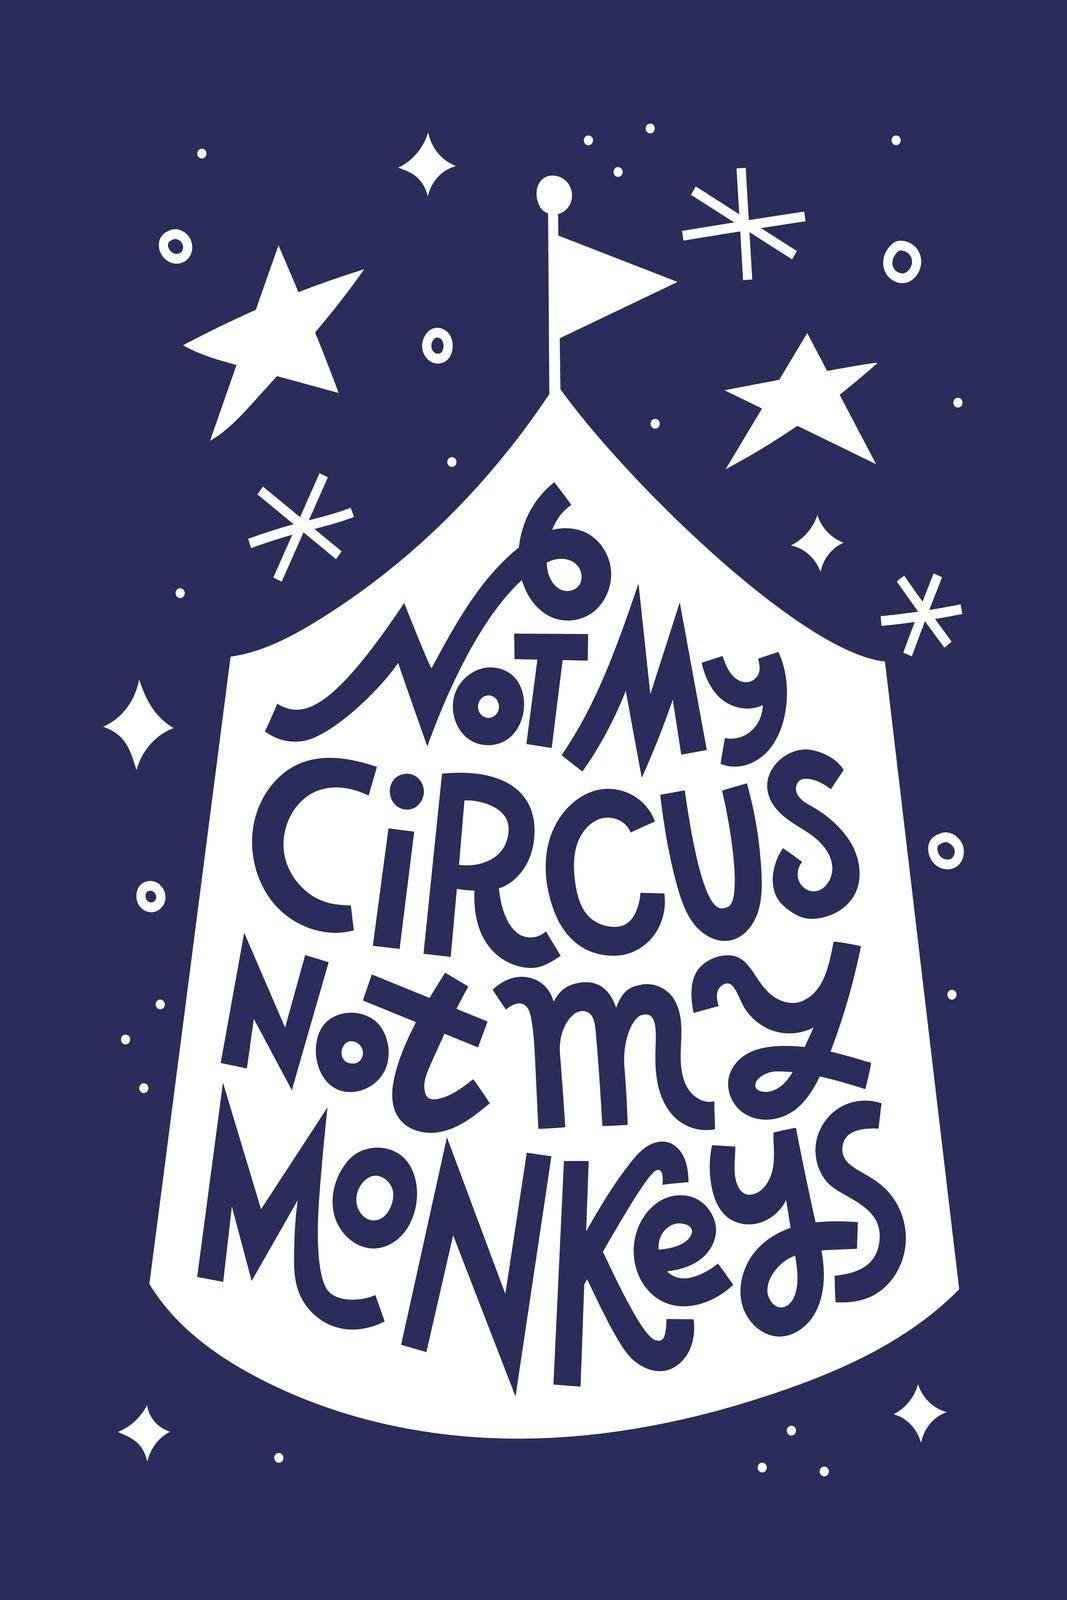 Not my circus, not my monkeys. Funny Polish saying by chickfishdoodles